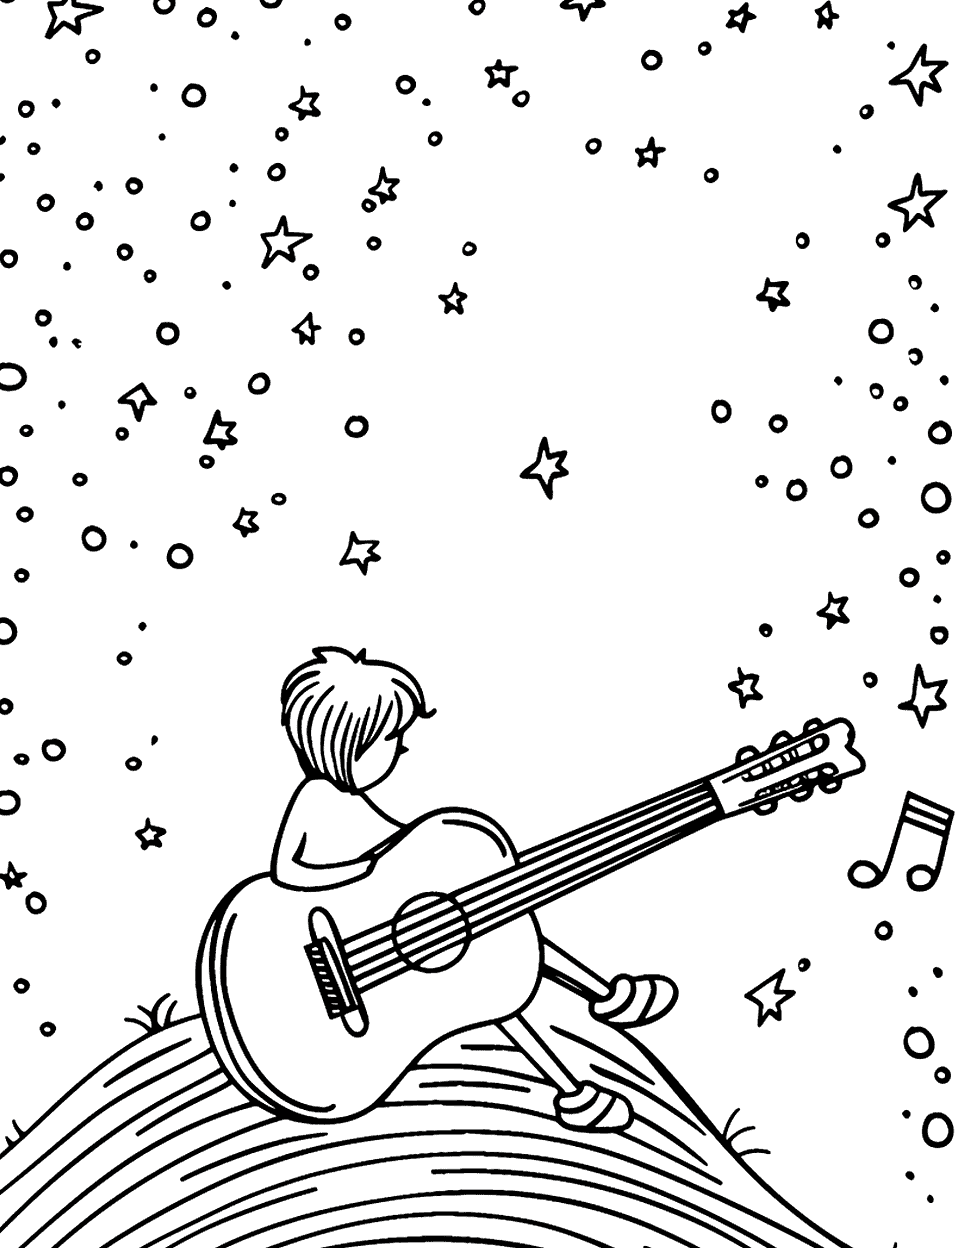 Guitar Solo Under the Stars Music Coloring Page - A child sitting on a hill playing an acoustic guitar with a night sky filled with stars above.